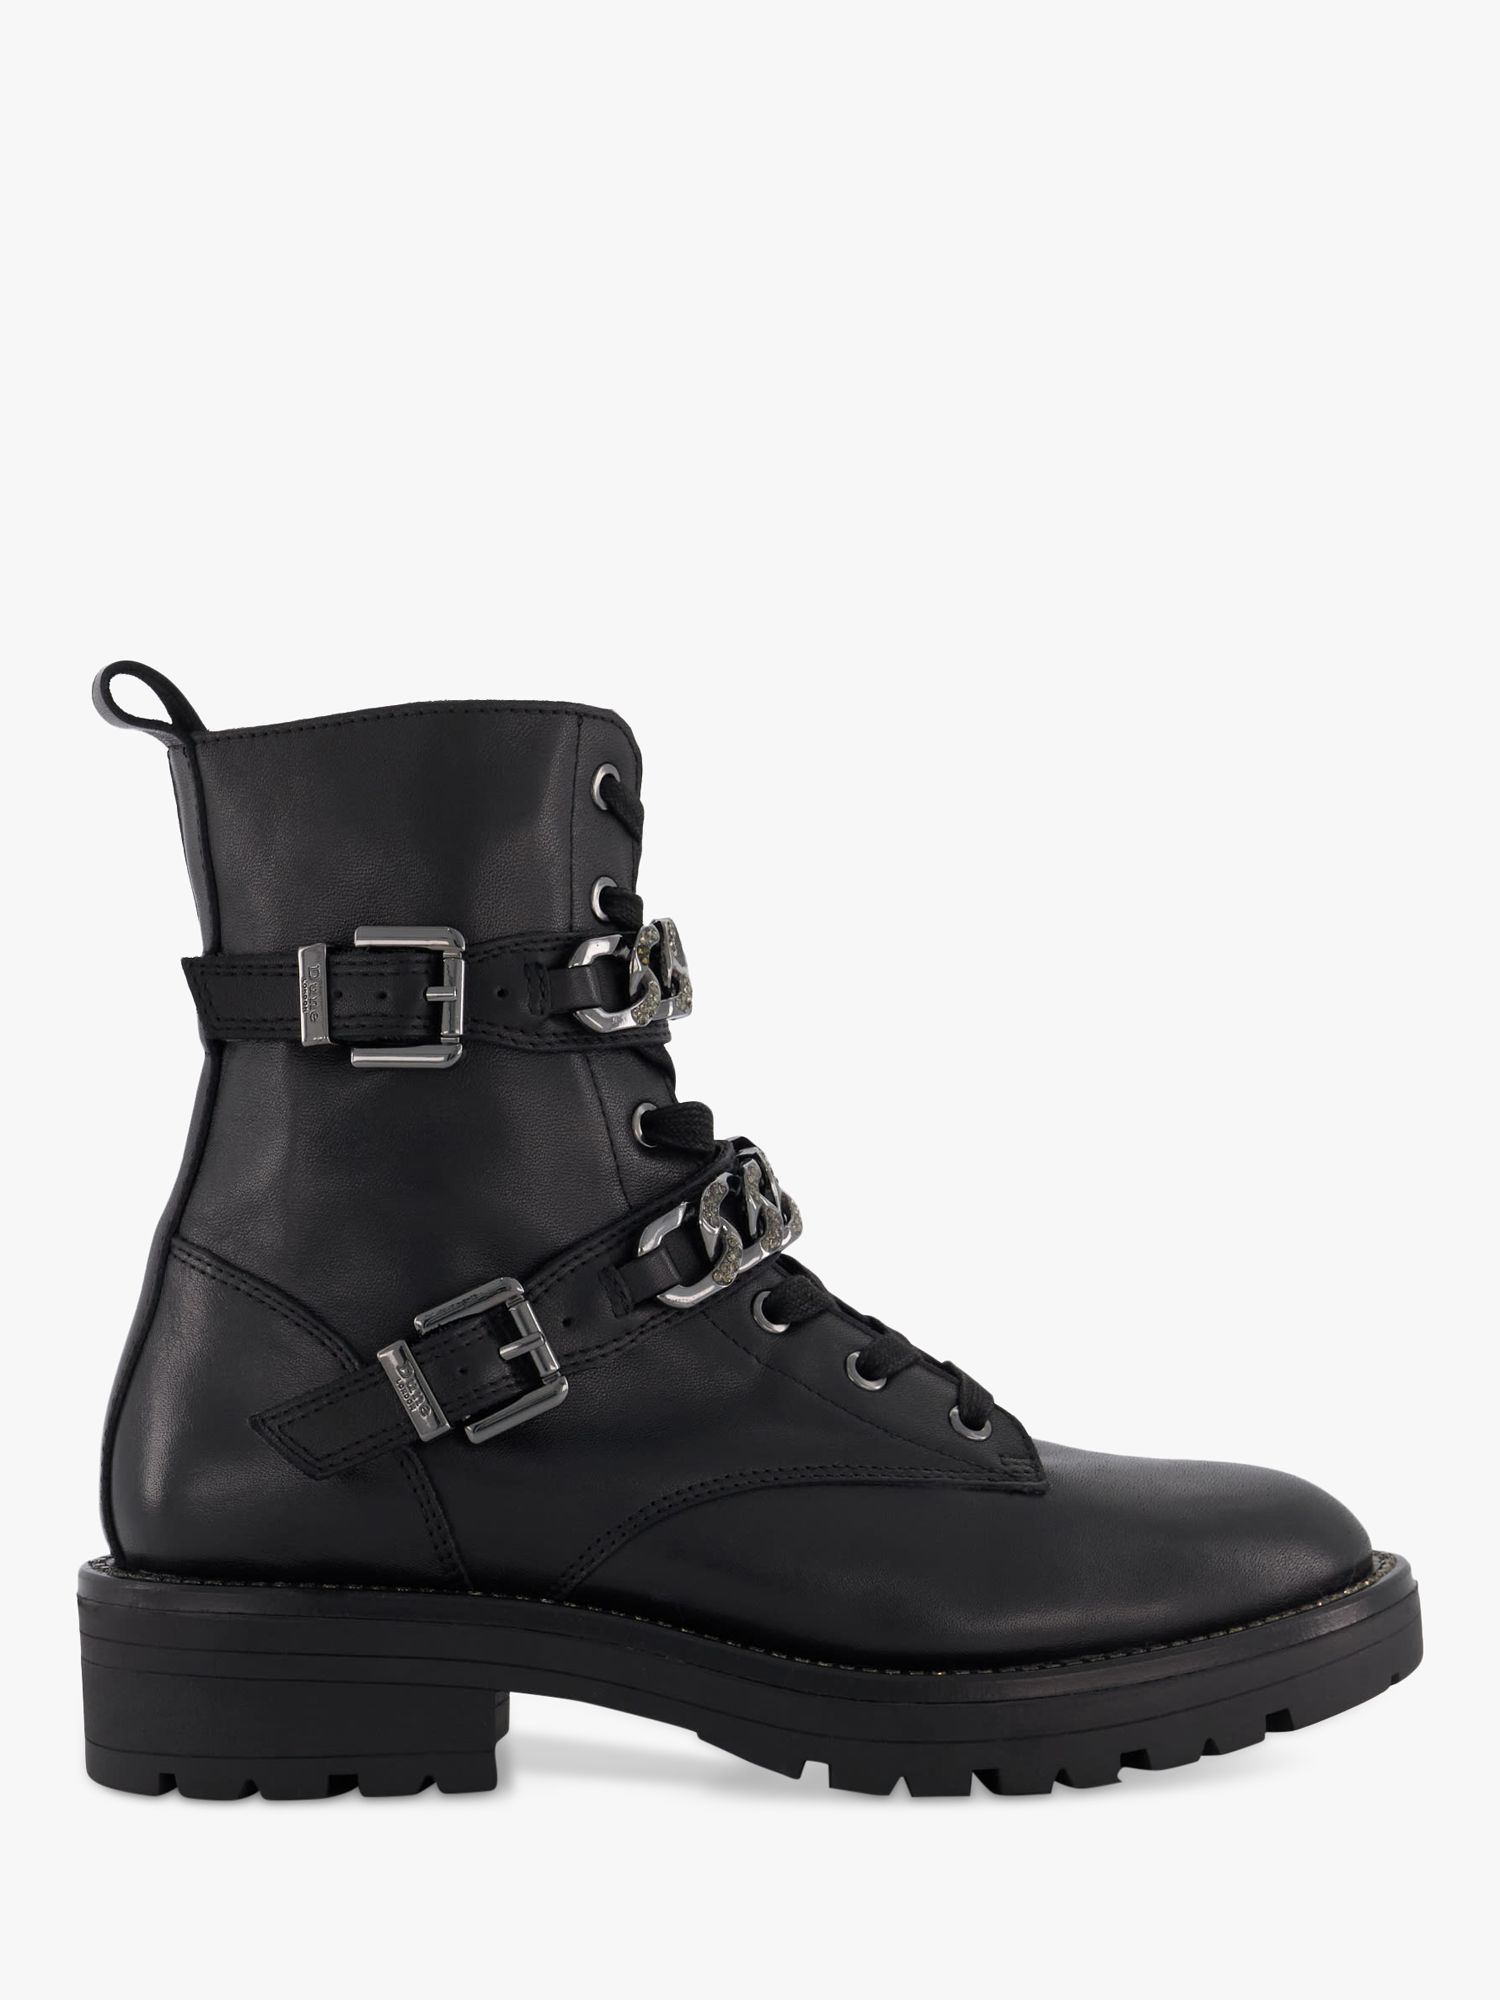 Dune Plazas Leather Ankle Boots, Black/Silver at John Lewis & Partners